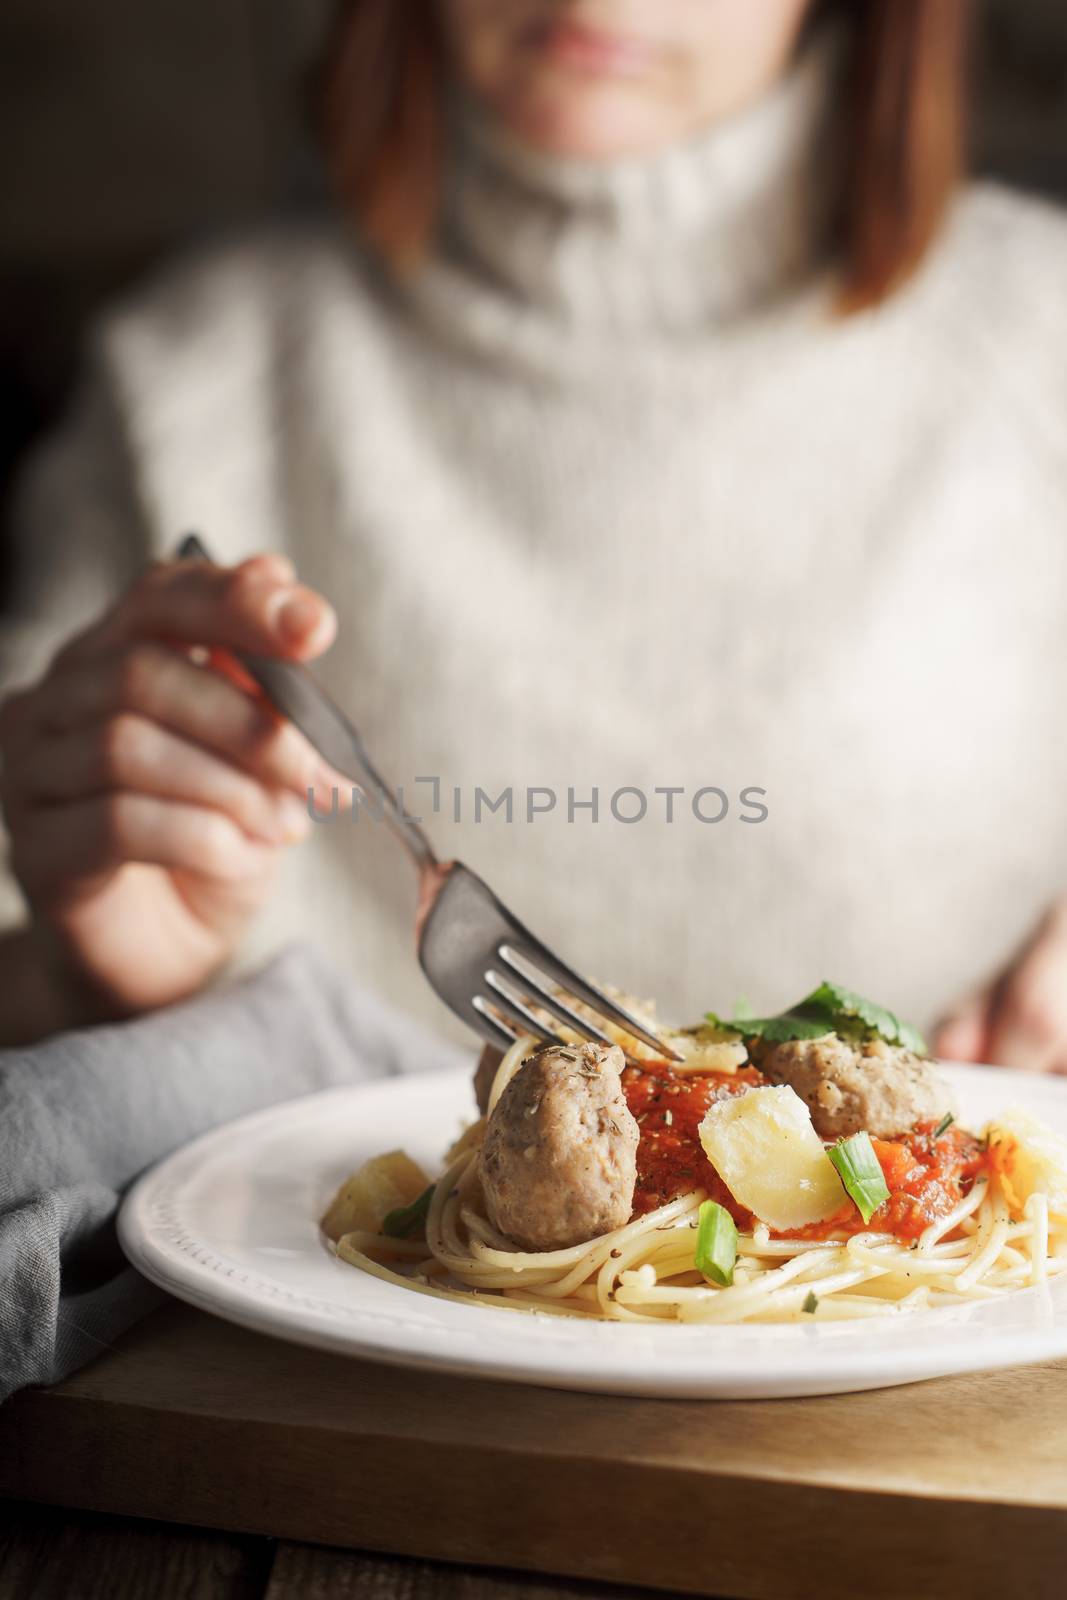 Woman eating spaghetti with meatballs vertical